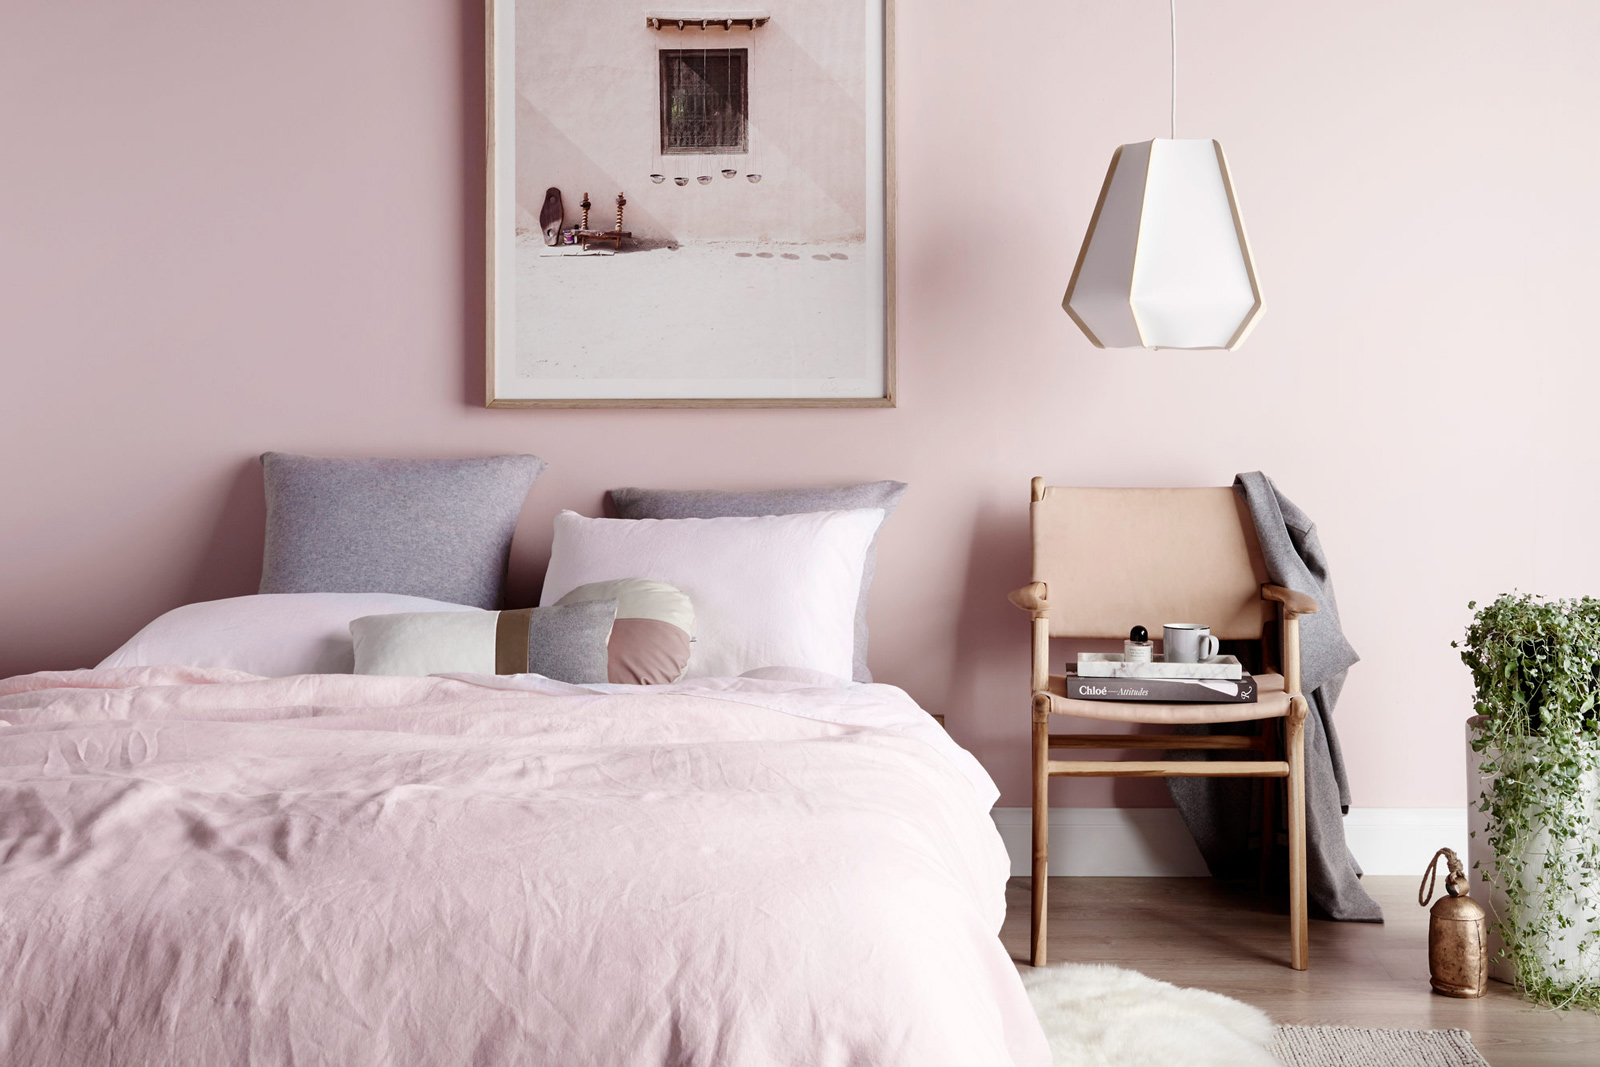 Minimalist Bedroom Design and Décor Ideas With Hanging Lamp and Peach Colour Wall Paint - Beautiful Homes